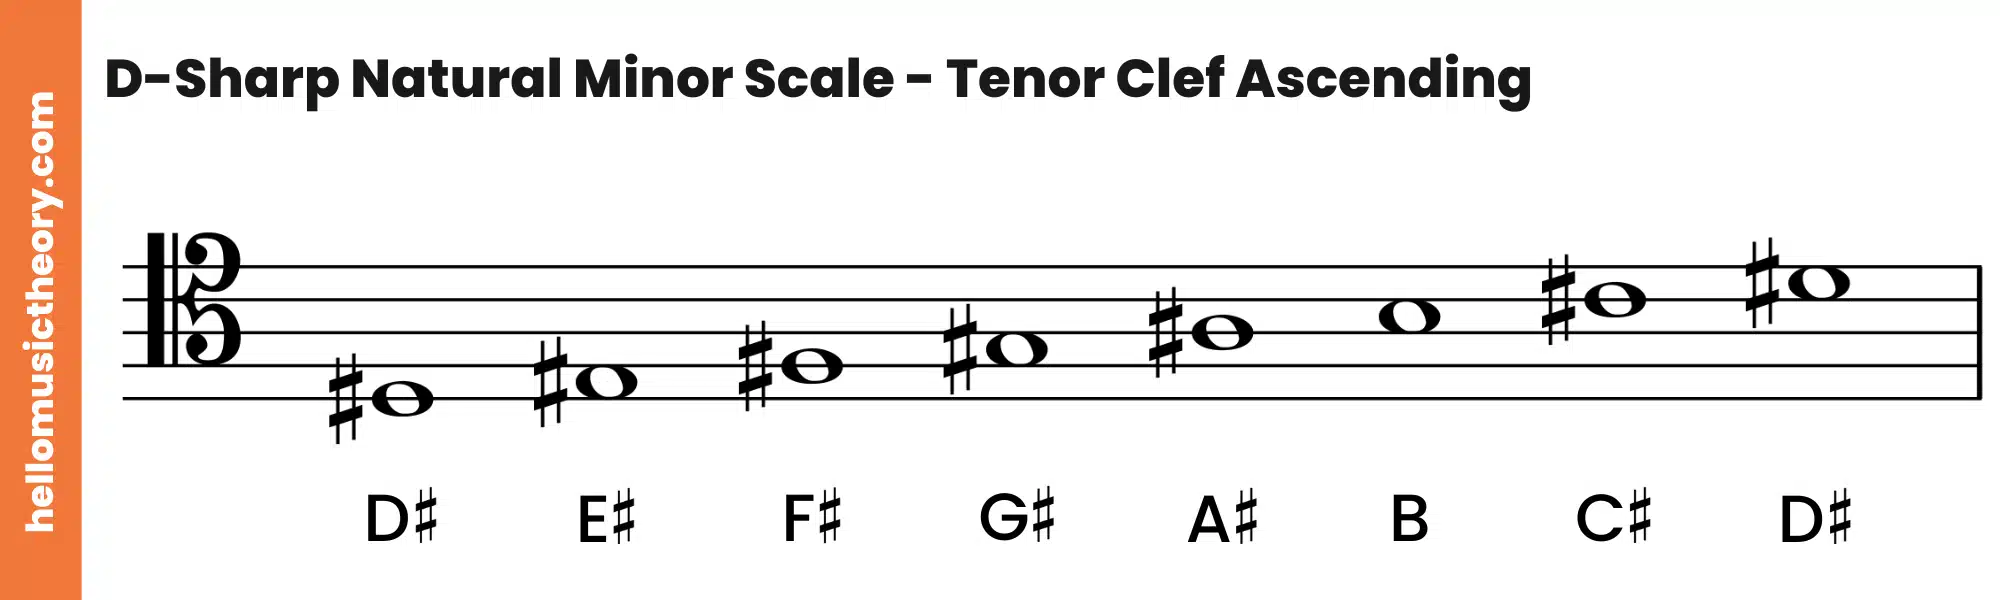 D-Sharp Natural Minor Scale Tenor Clef Ascending